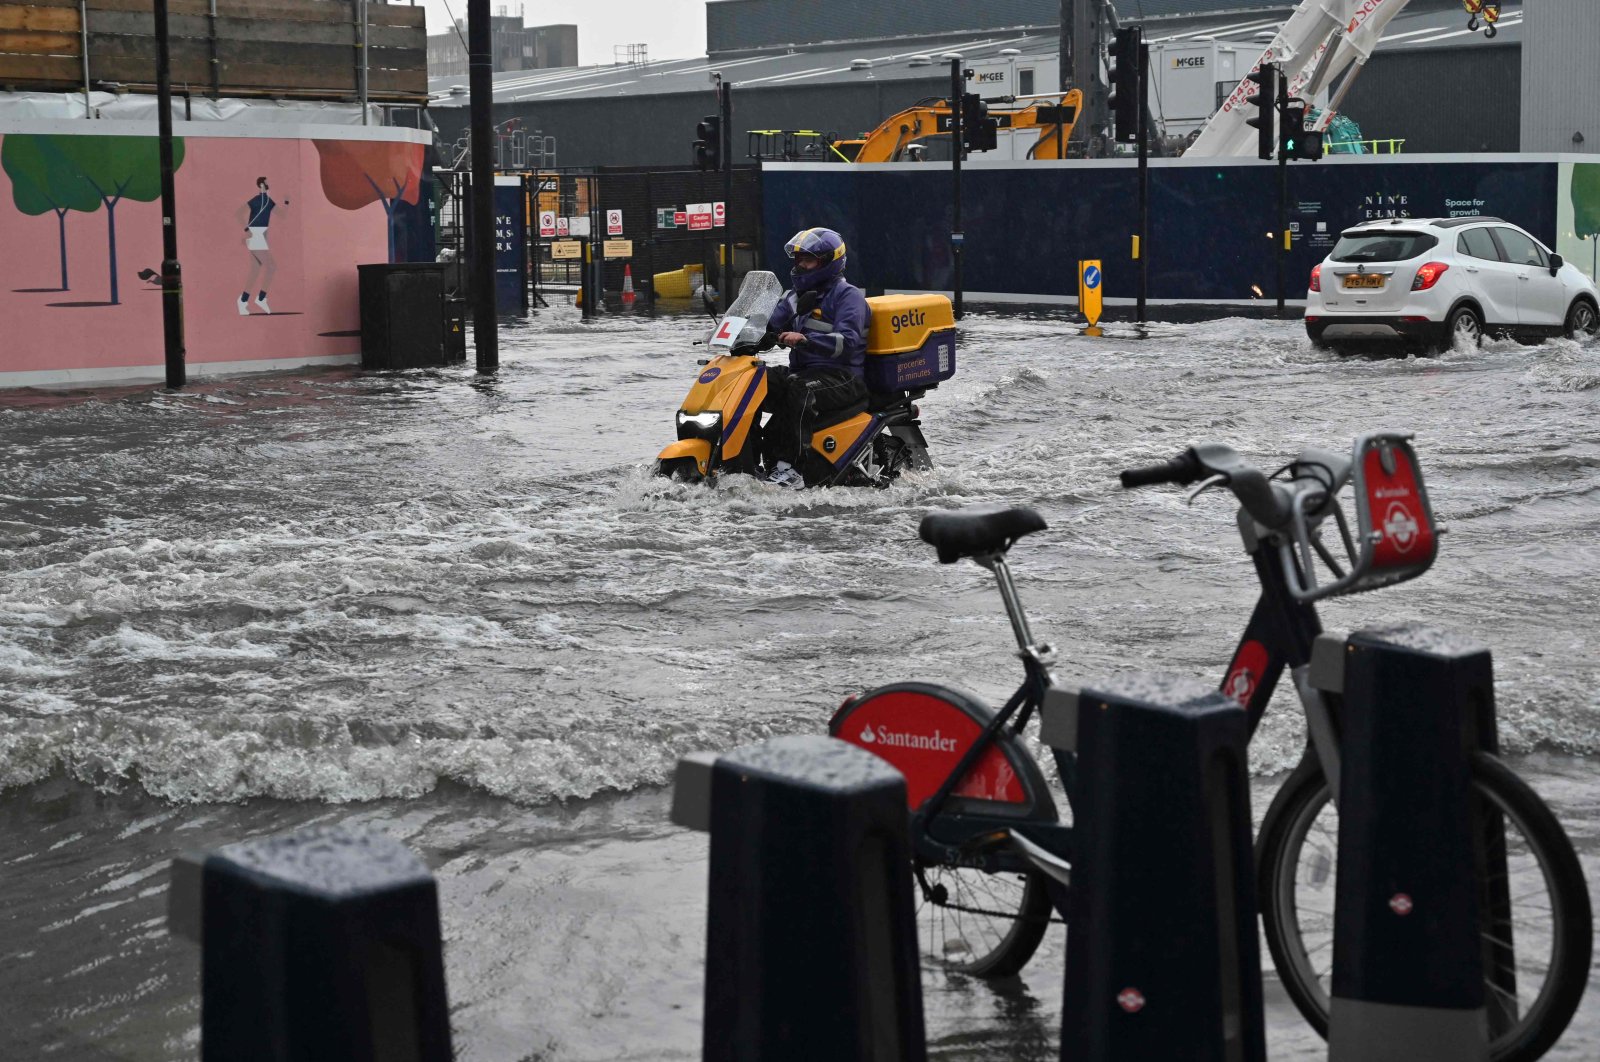 A motorcyclist rides through deep water on a flooded road in The Nine Elms district of London, England, July 25, 2021. (AFP Photo)